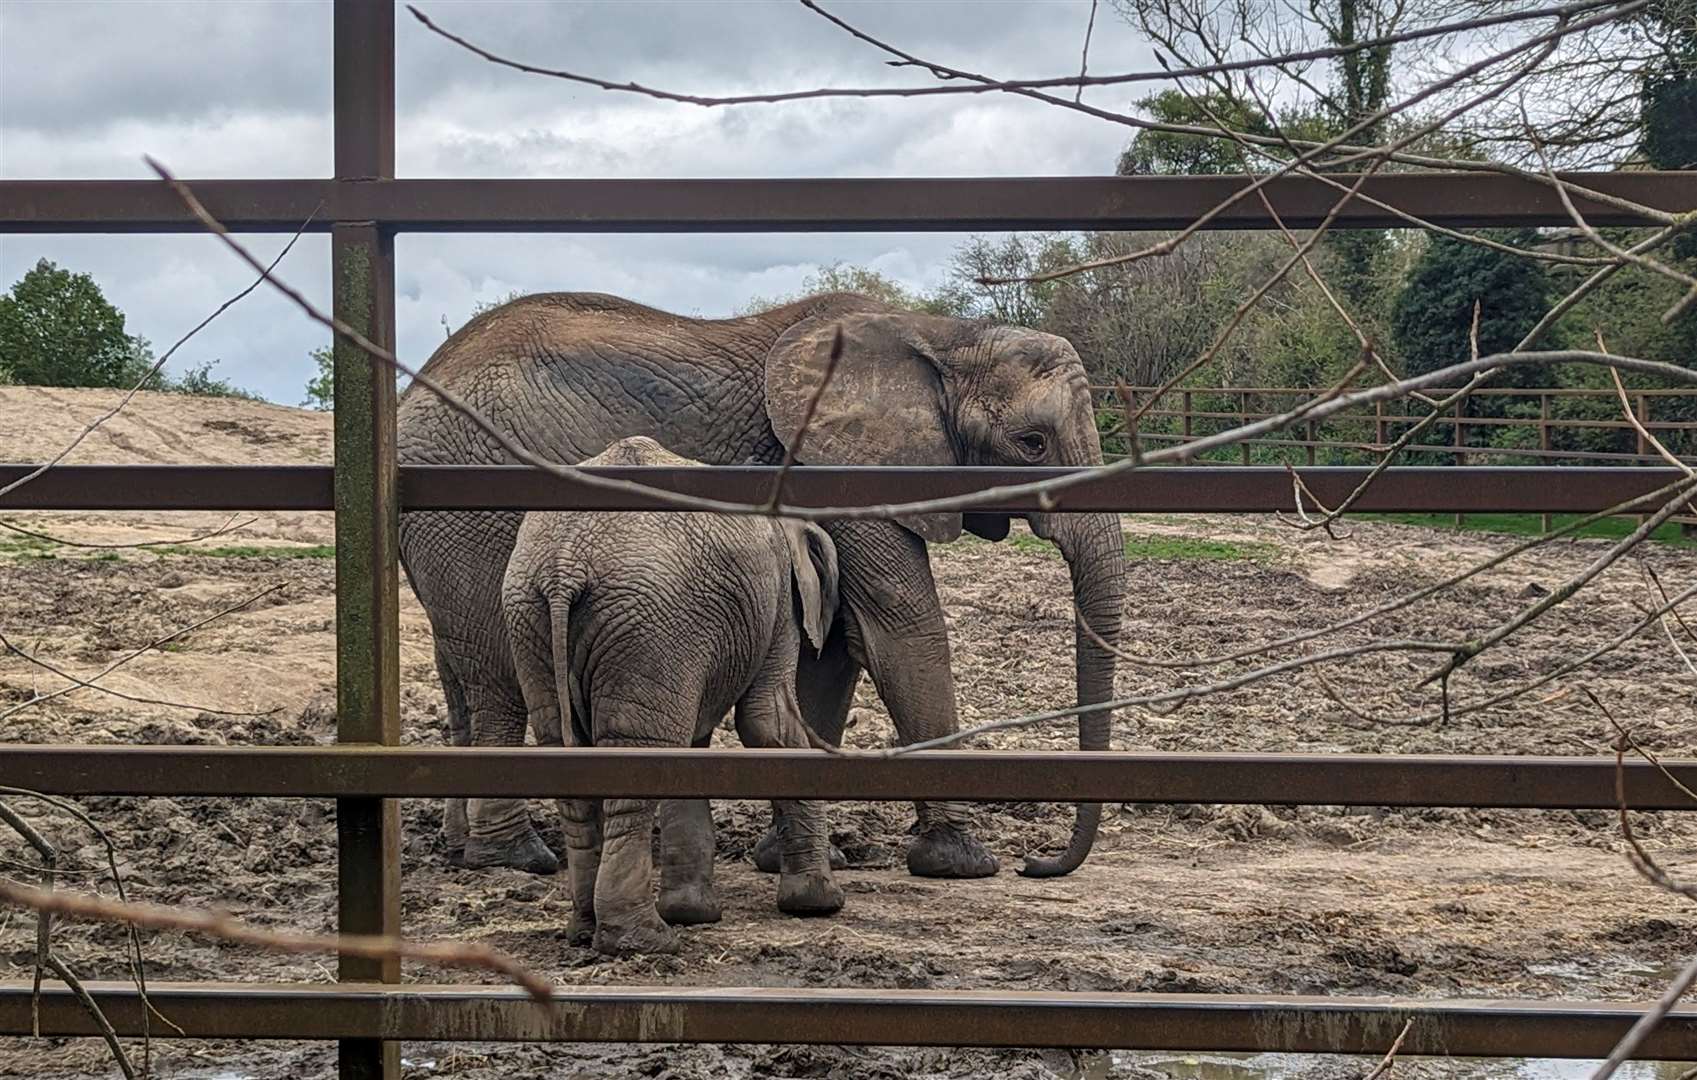 Howletts is home to a 13-strong herd of African elephants